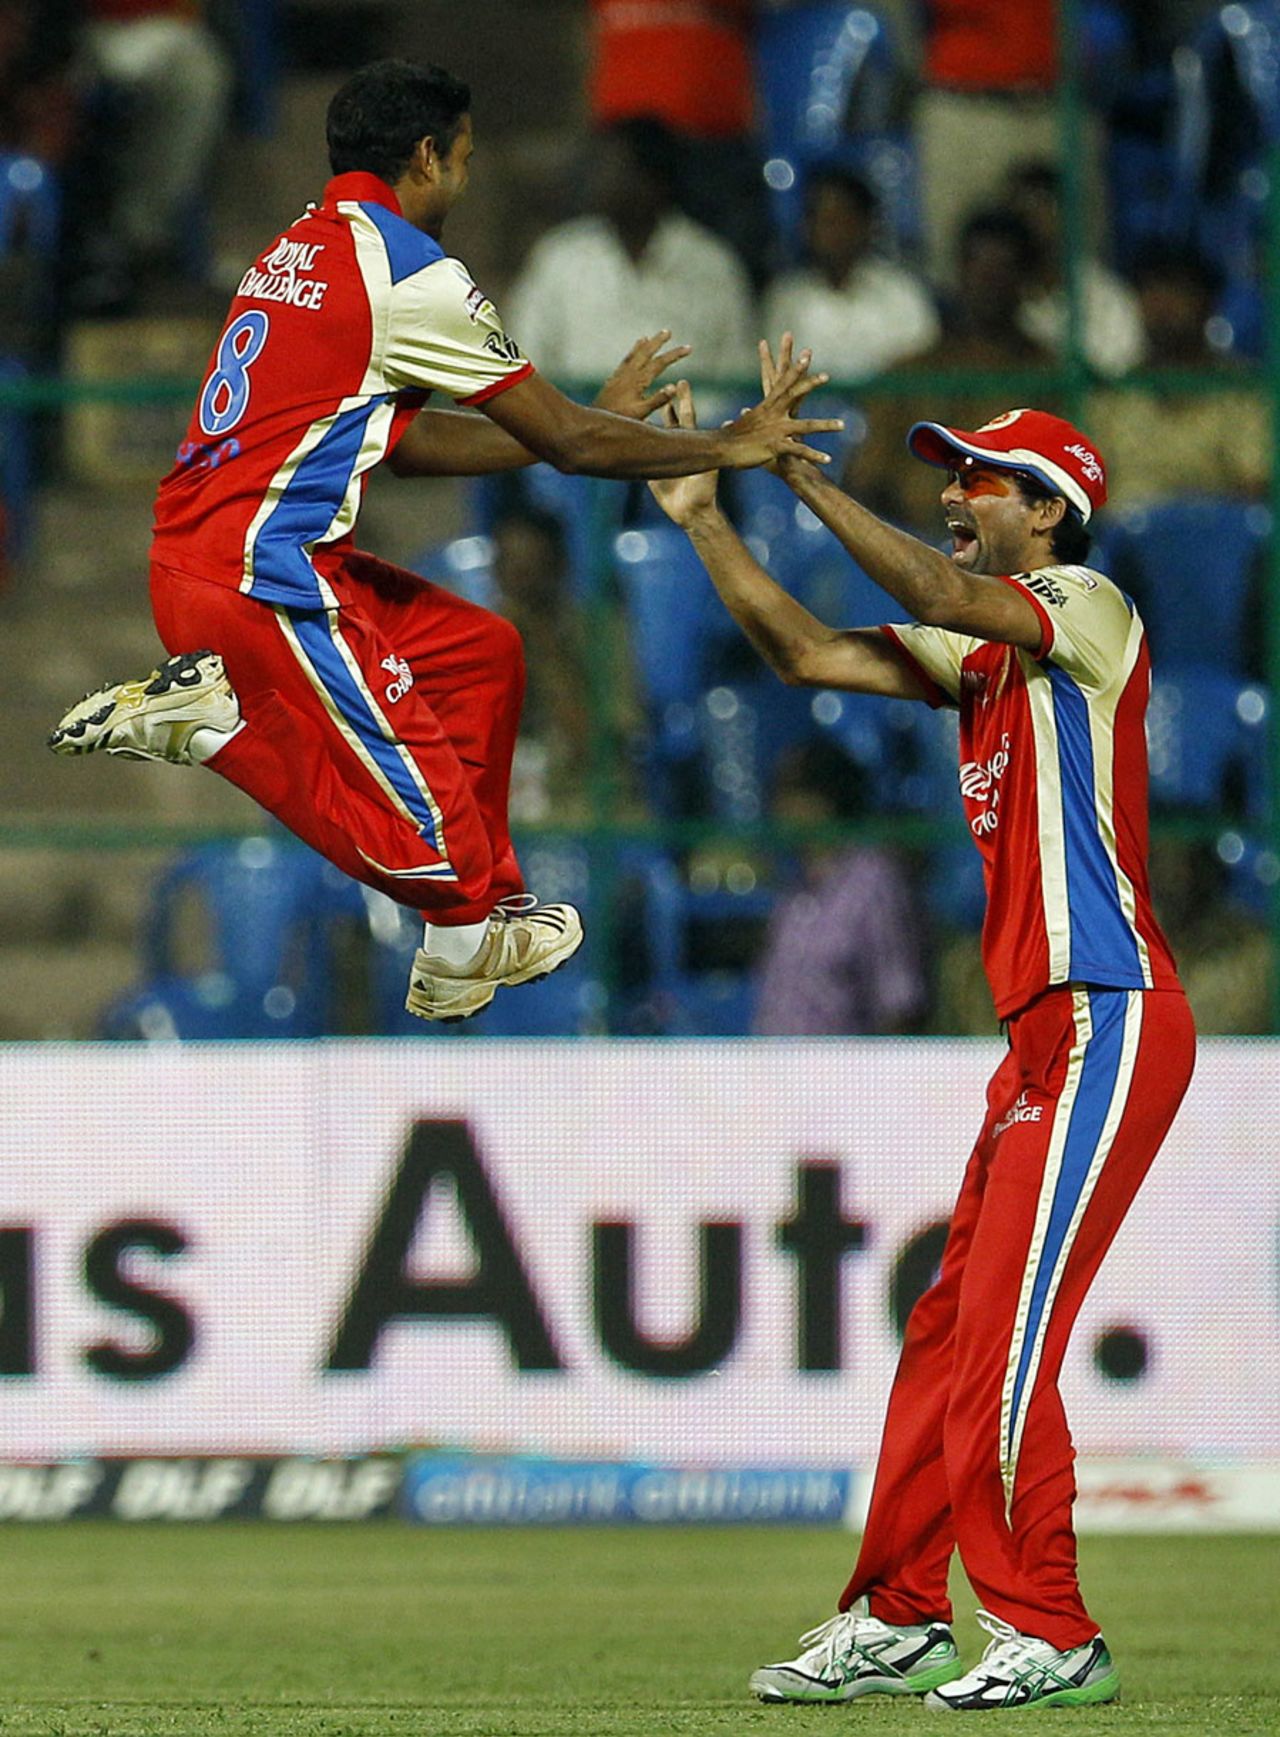 J Syed Mohammad and Mohammad Kaif combined to remove Jesse Ryder, Royal Challengers Bangalore v Pune Warriors, IPL 2011, Bangalore, April 29, 2011